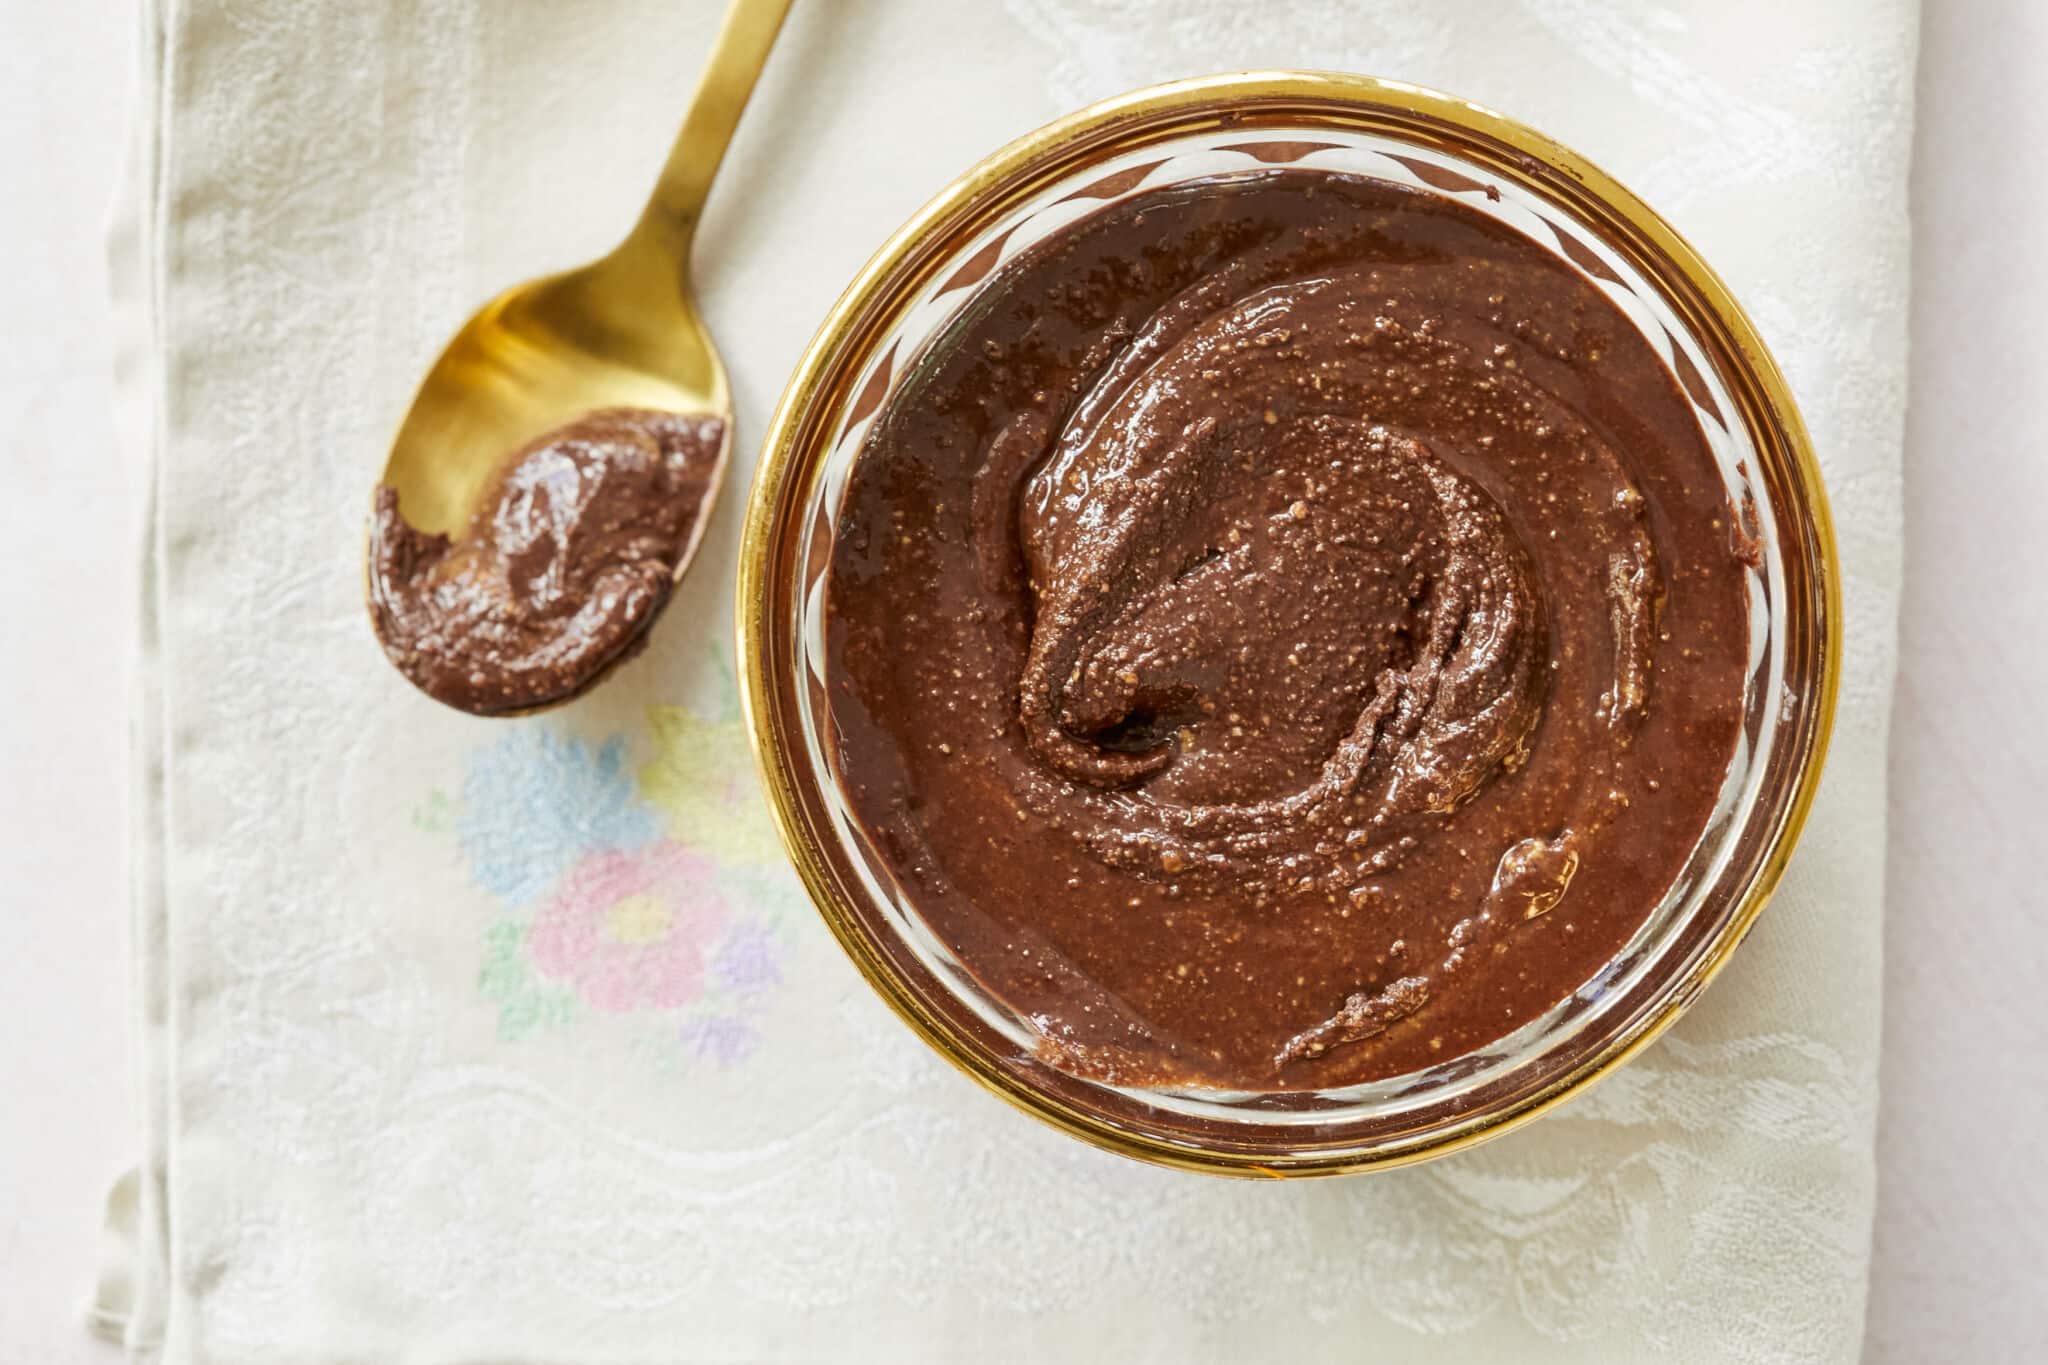 An overhead shot of Homemade Nutella in a glass bowl, with a gold spoon next to it on a floral tablecloth.